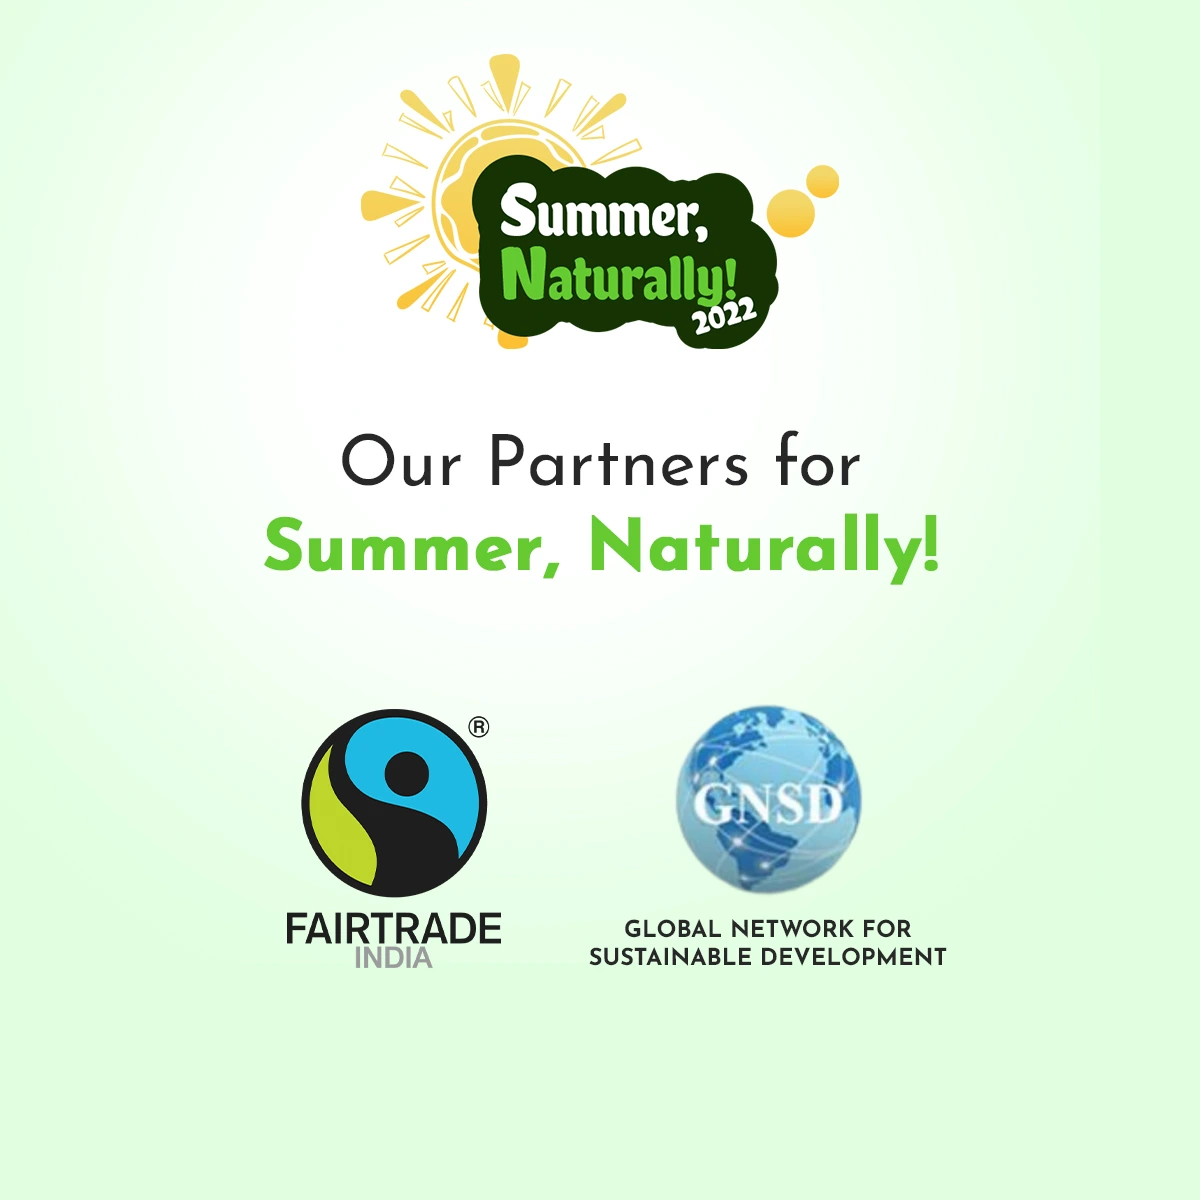 Project-based learning program for schools in partnership with Fairtrade India and GNSD